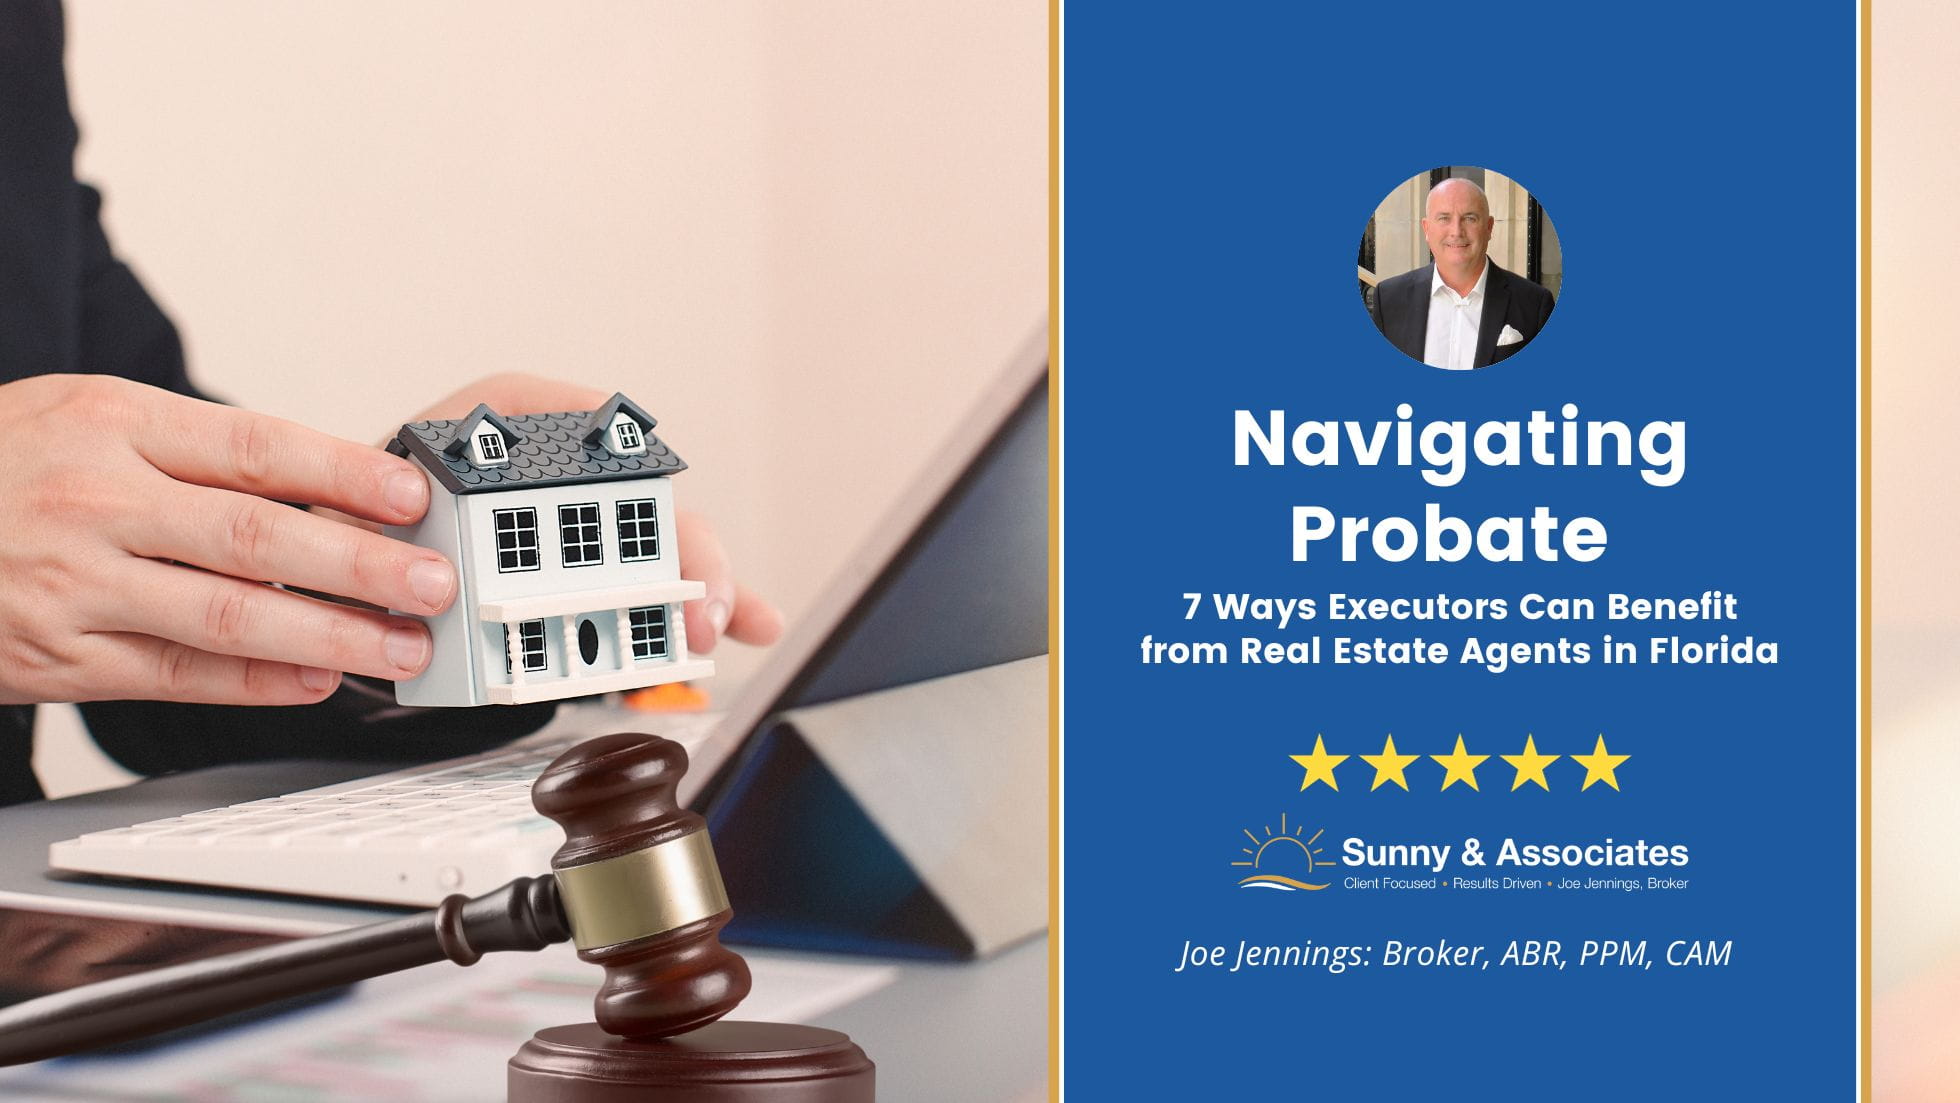 Navigating Probate 7 Ways Executors Can Benefit from Real Estate Agents in Florida